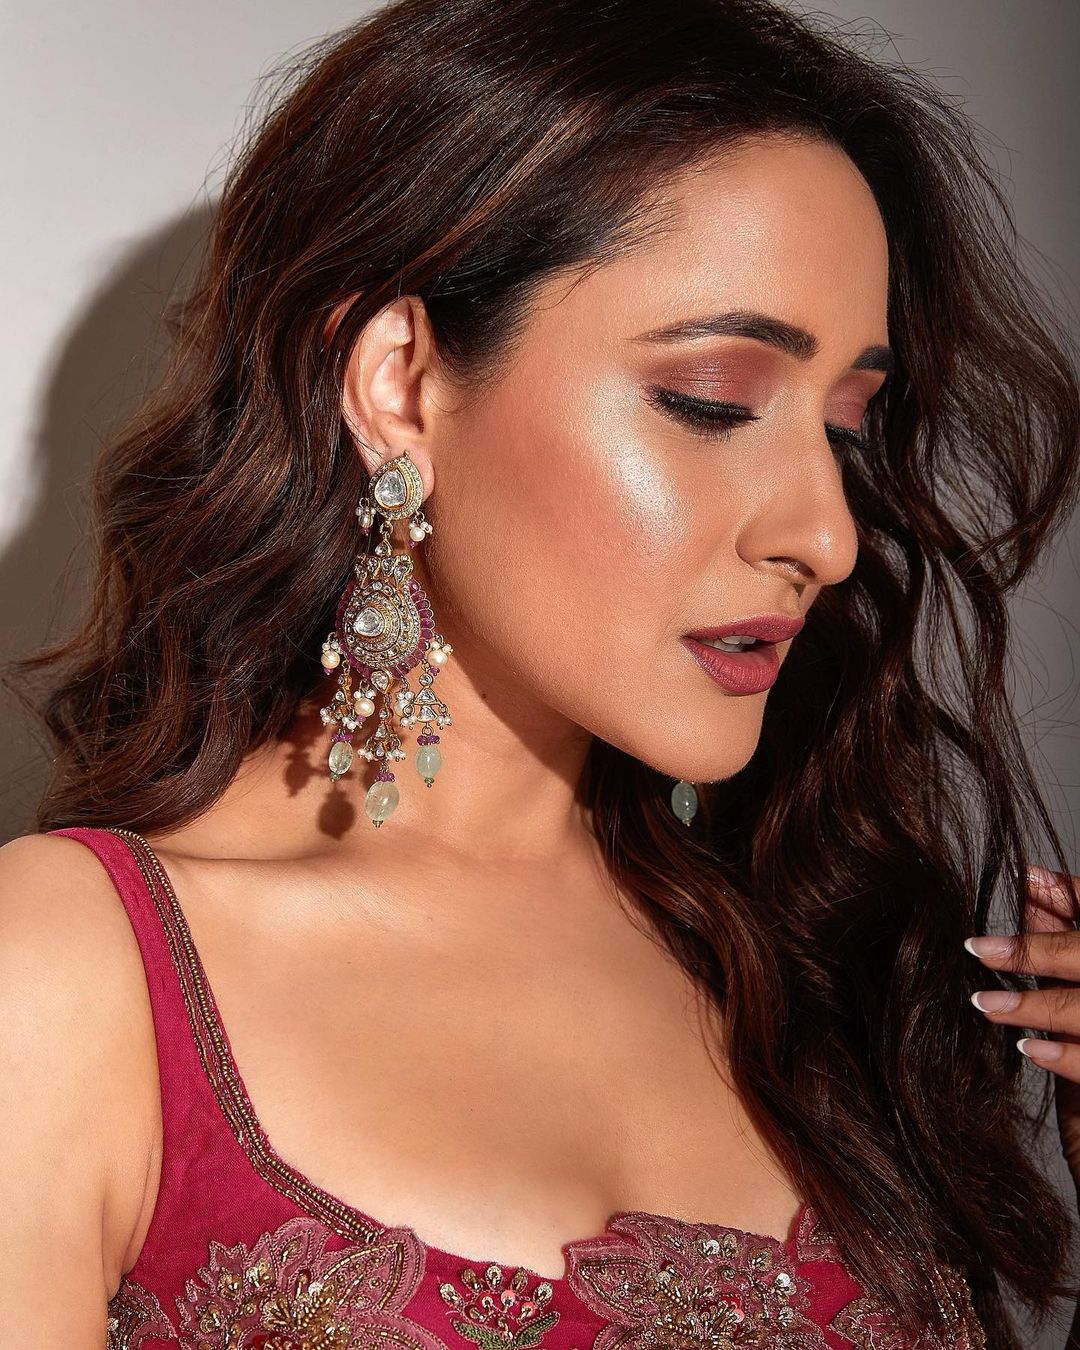 Actress pragya jaiswal looks graceful and beautiful in this images-Actresspragya, Pragya Jaiswal Photos,Spicy Hot Pics,Images,High Resolution WallPapers Download